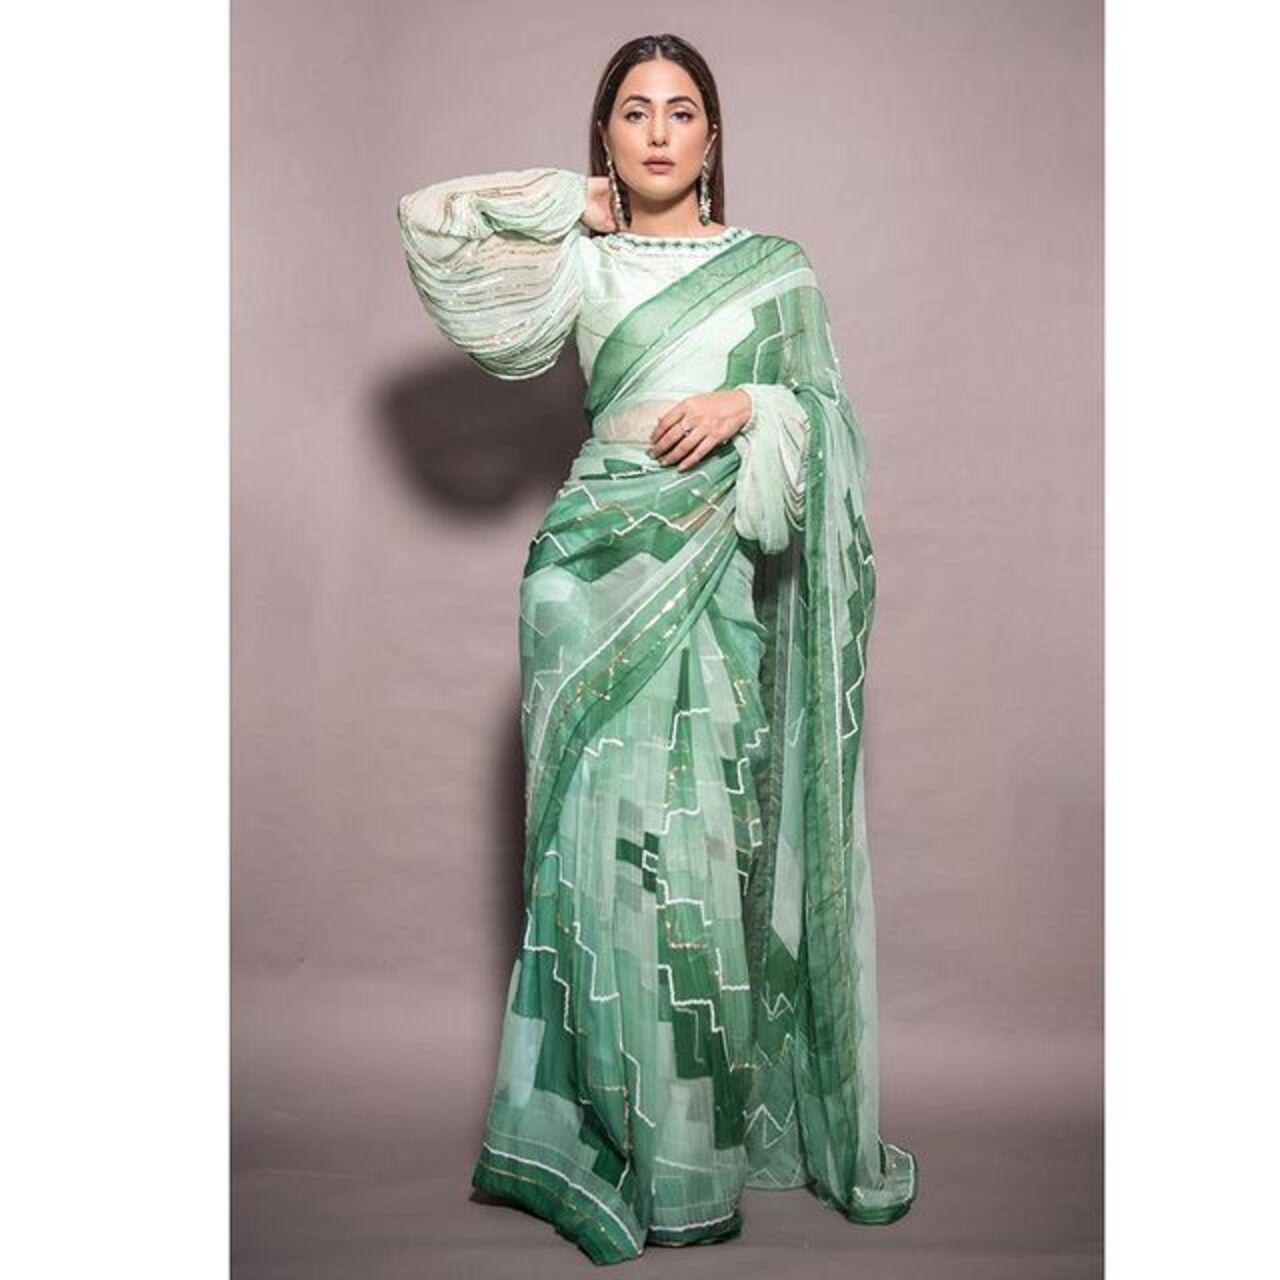 Hina Khan looks effortlessly gorgeous in her green abstract checkered print saree and puff-sleeved long blouse